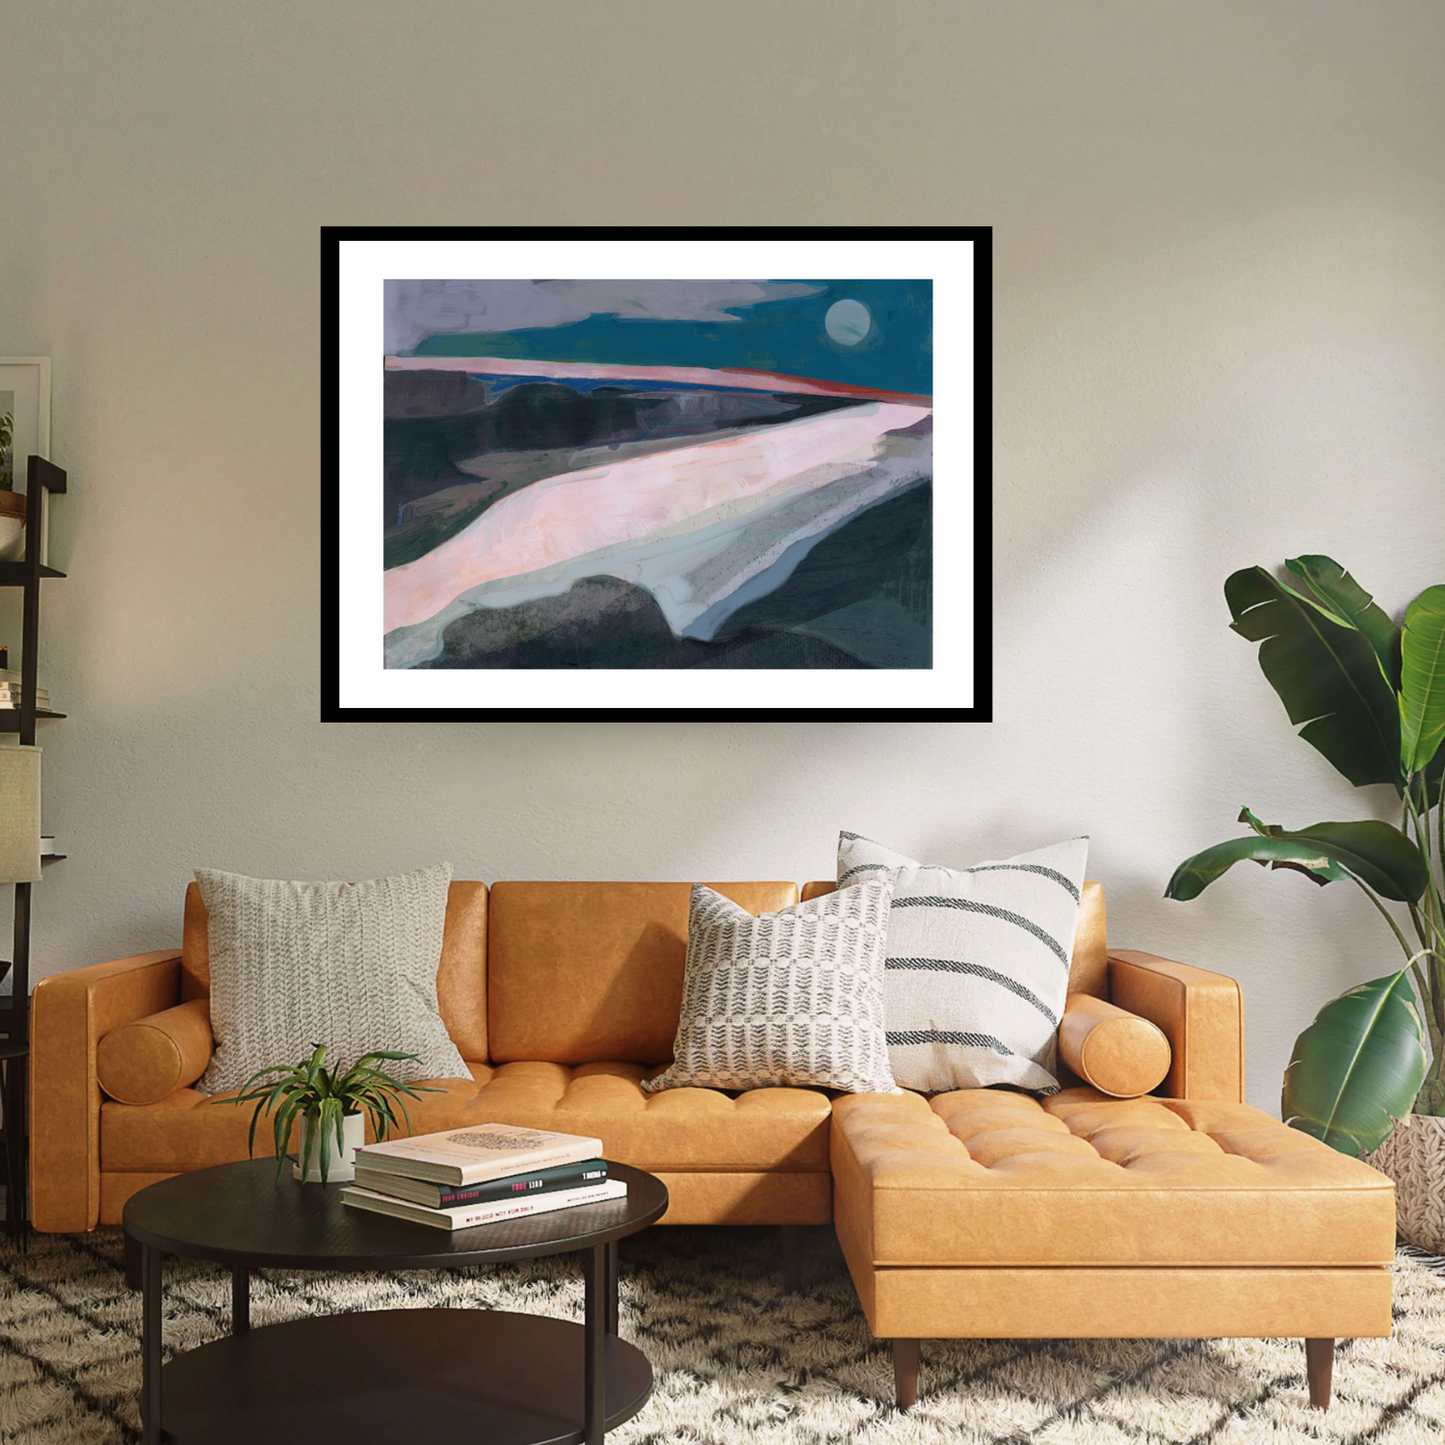 Dive into 'Broadstairs' by David McConochie: an abstract minimalist rural landscape, available as a black framed print. Tones of grey, teal, and pink paint a coastal scene, illuminated by a cool full moon. Let this serene artwork transport you to tranquil shores